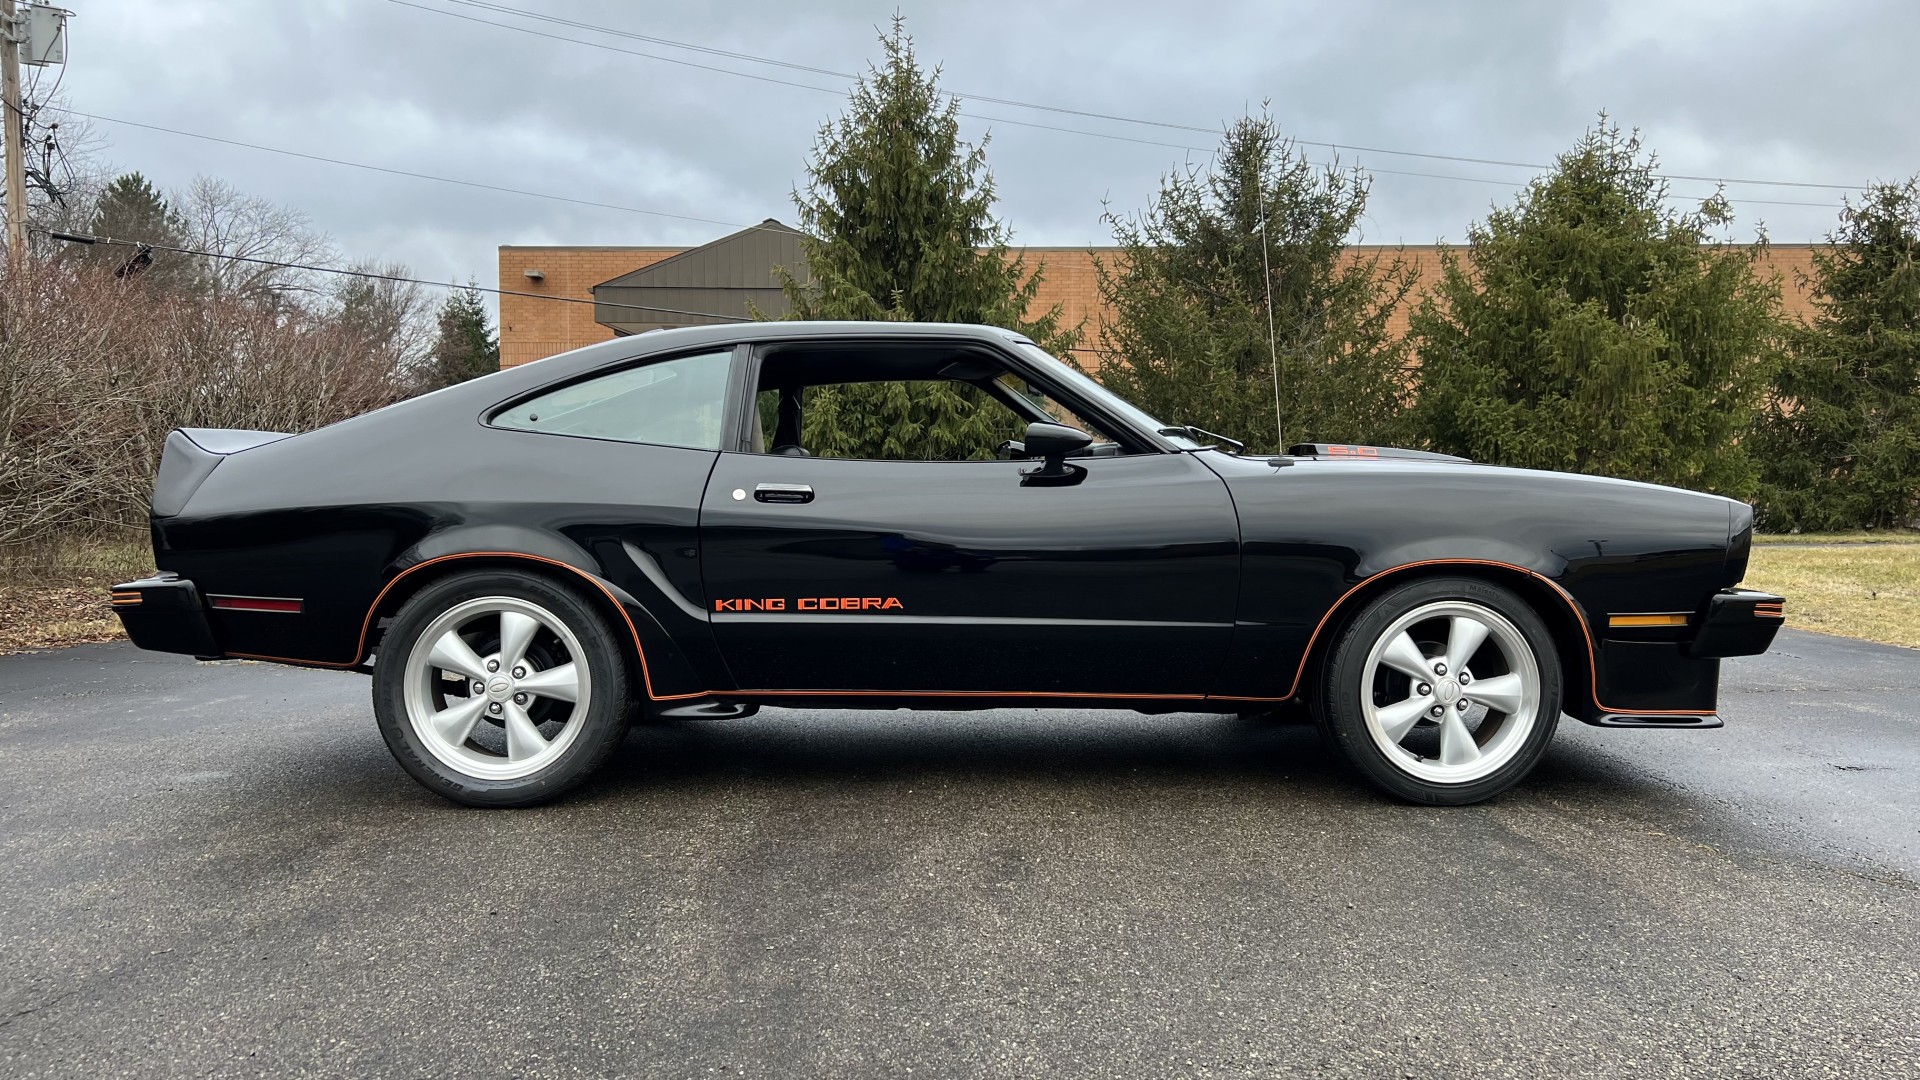 1978 Ford Mustang King Cobra, 302 Auto, Marti Report, Sold!